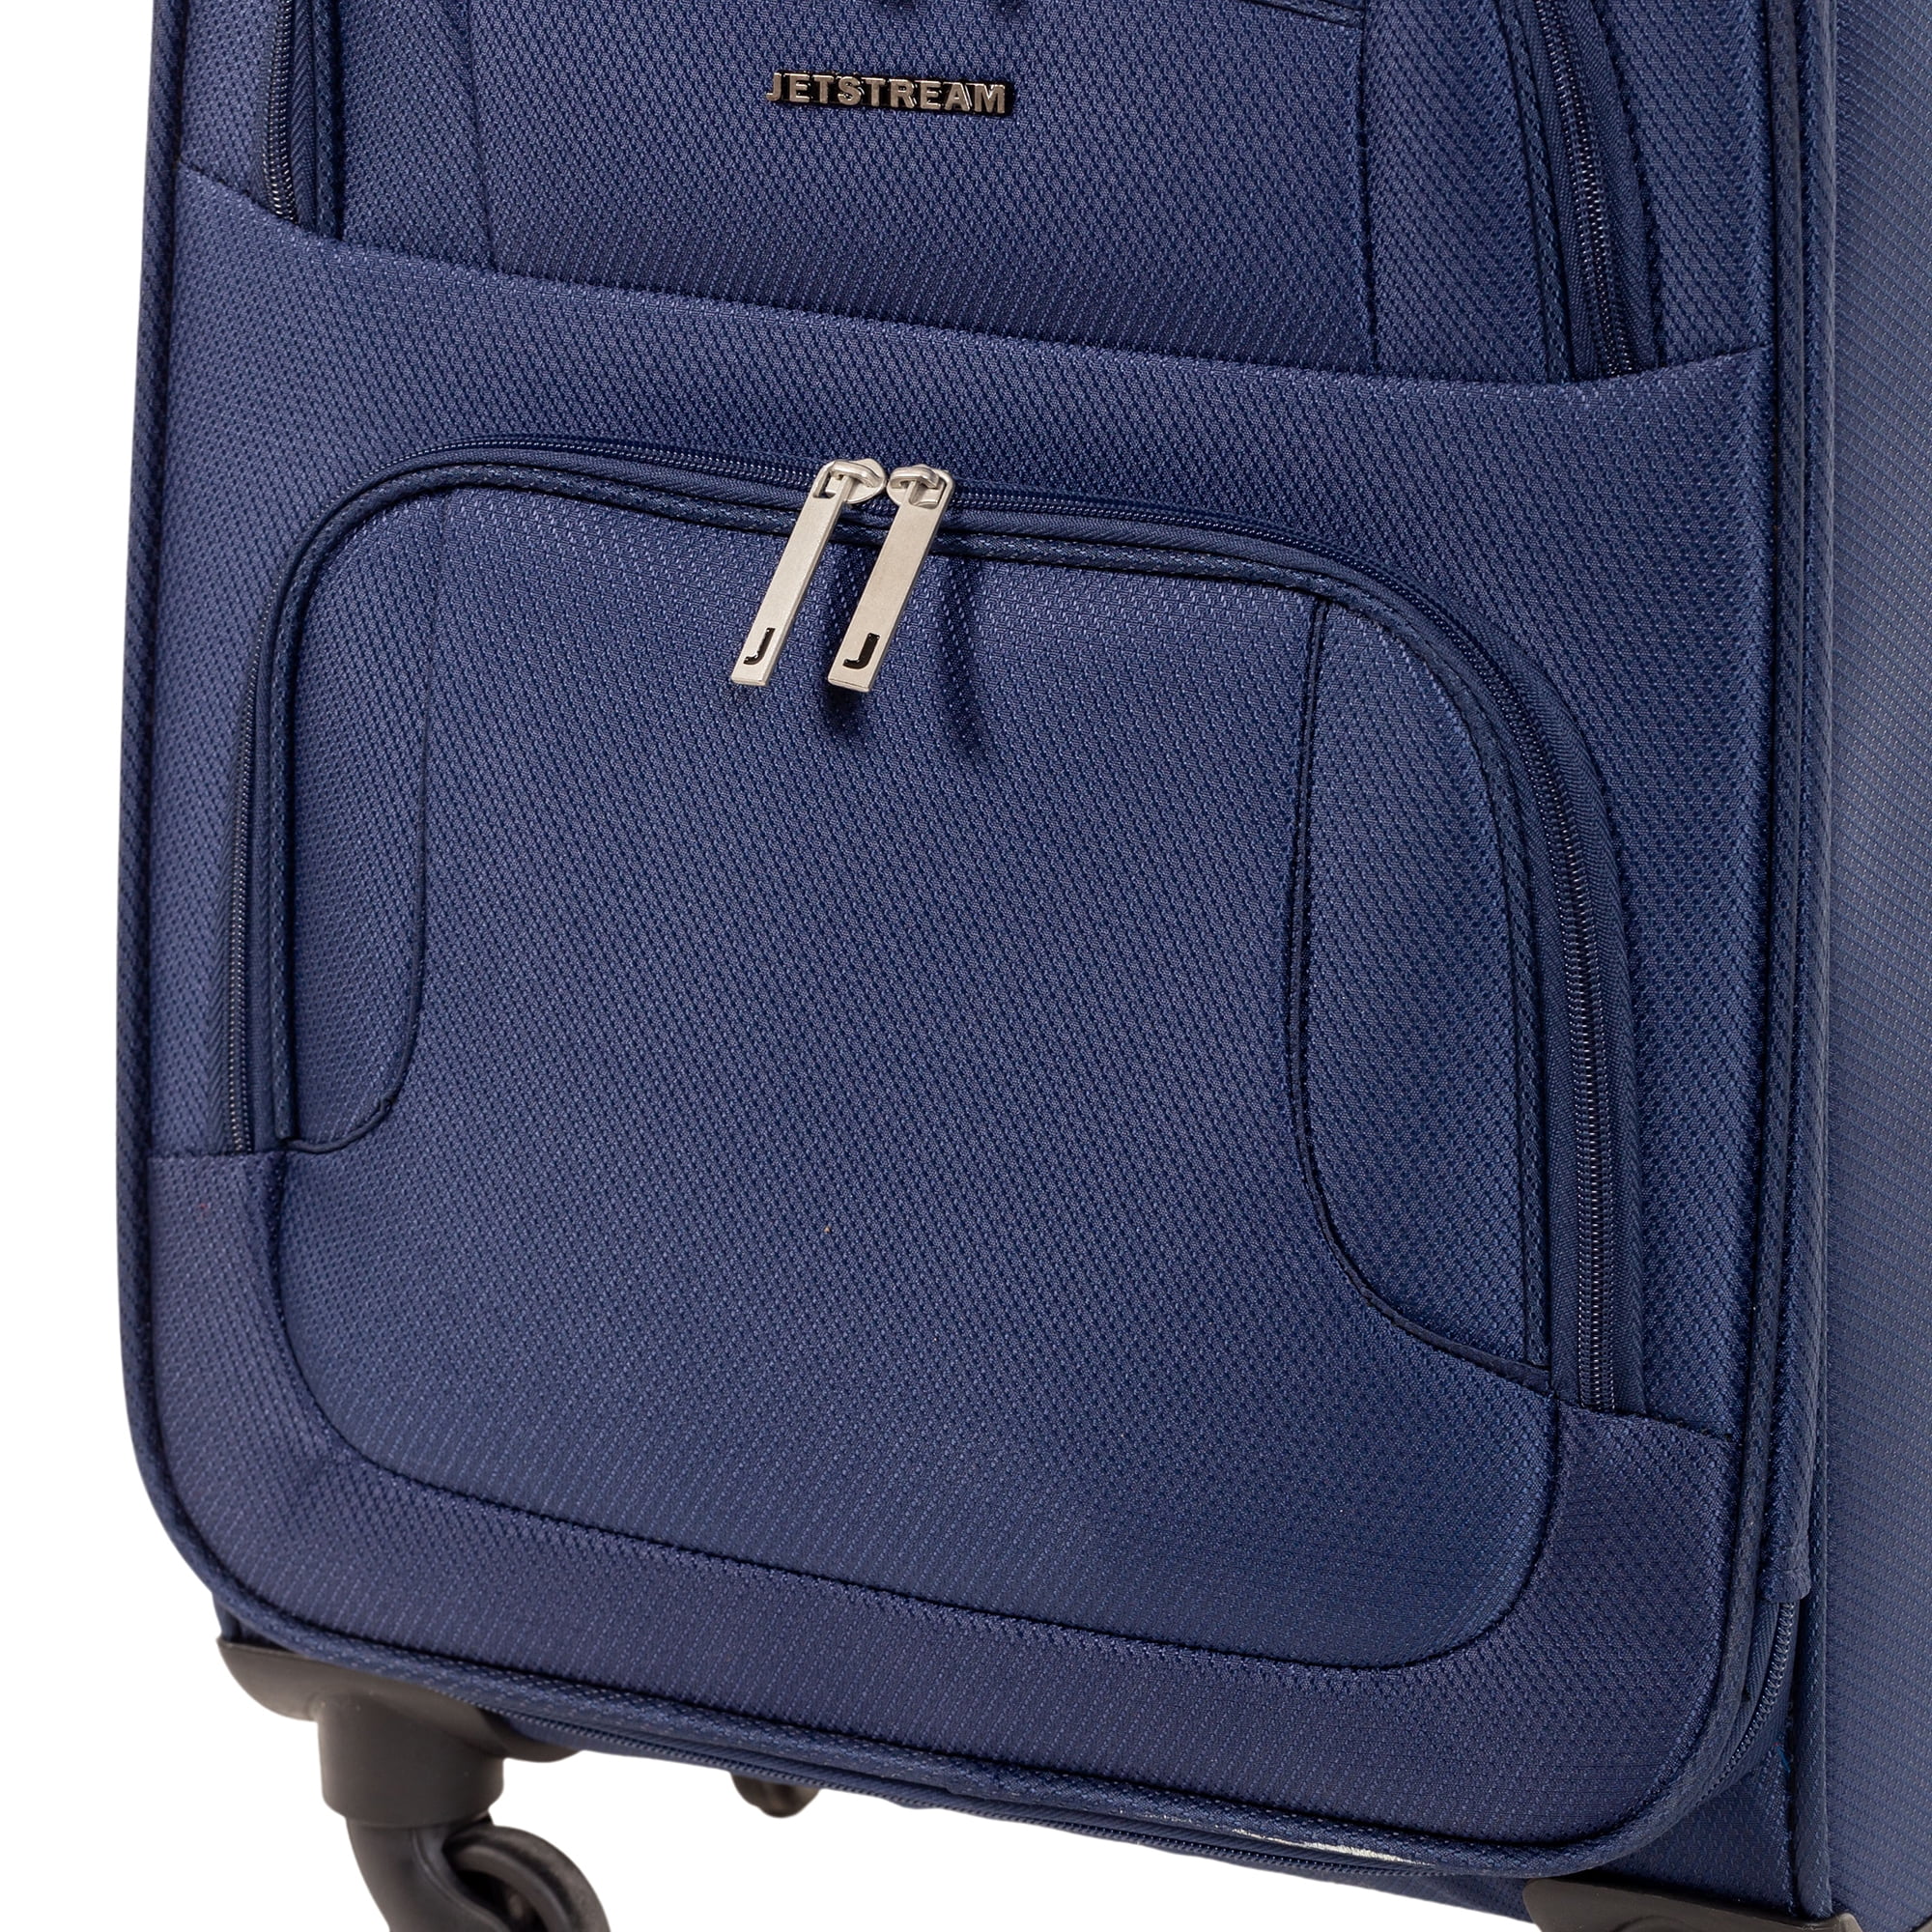 St Louis Cardinals 20 Navy Domestic Carry-On Spinner